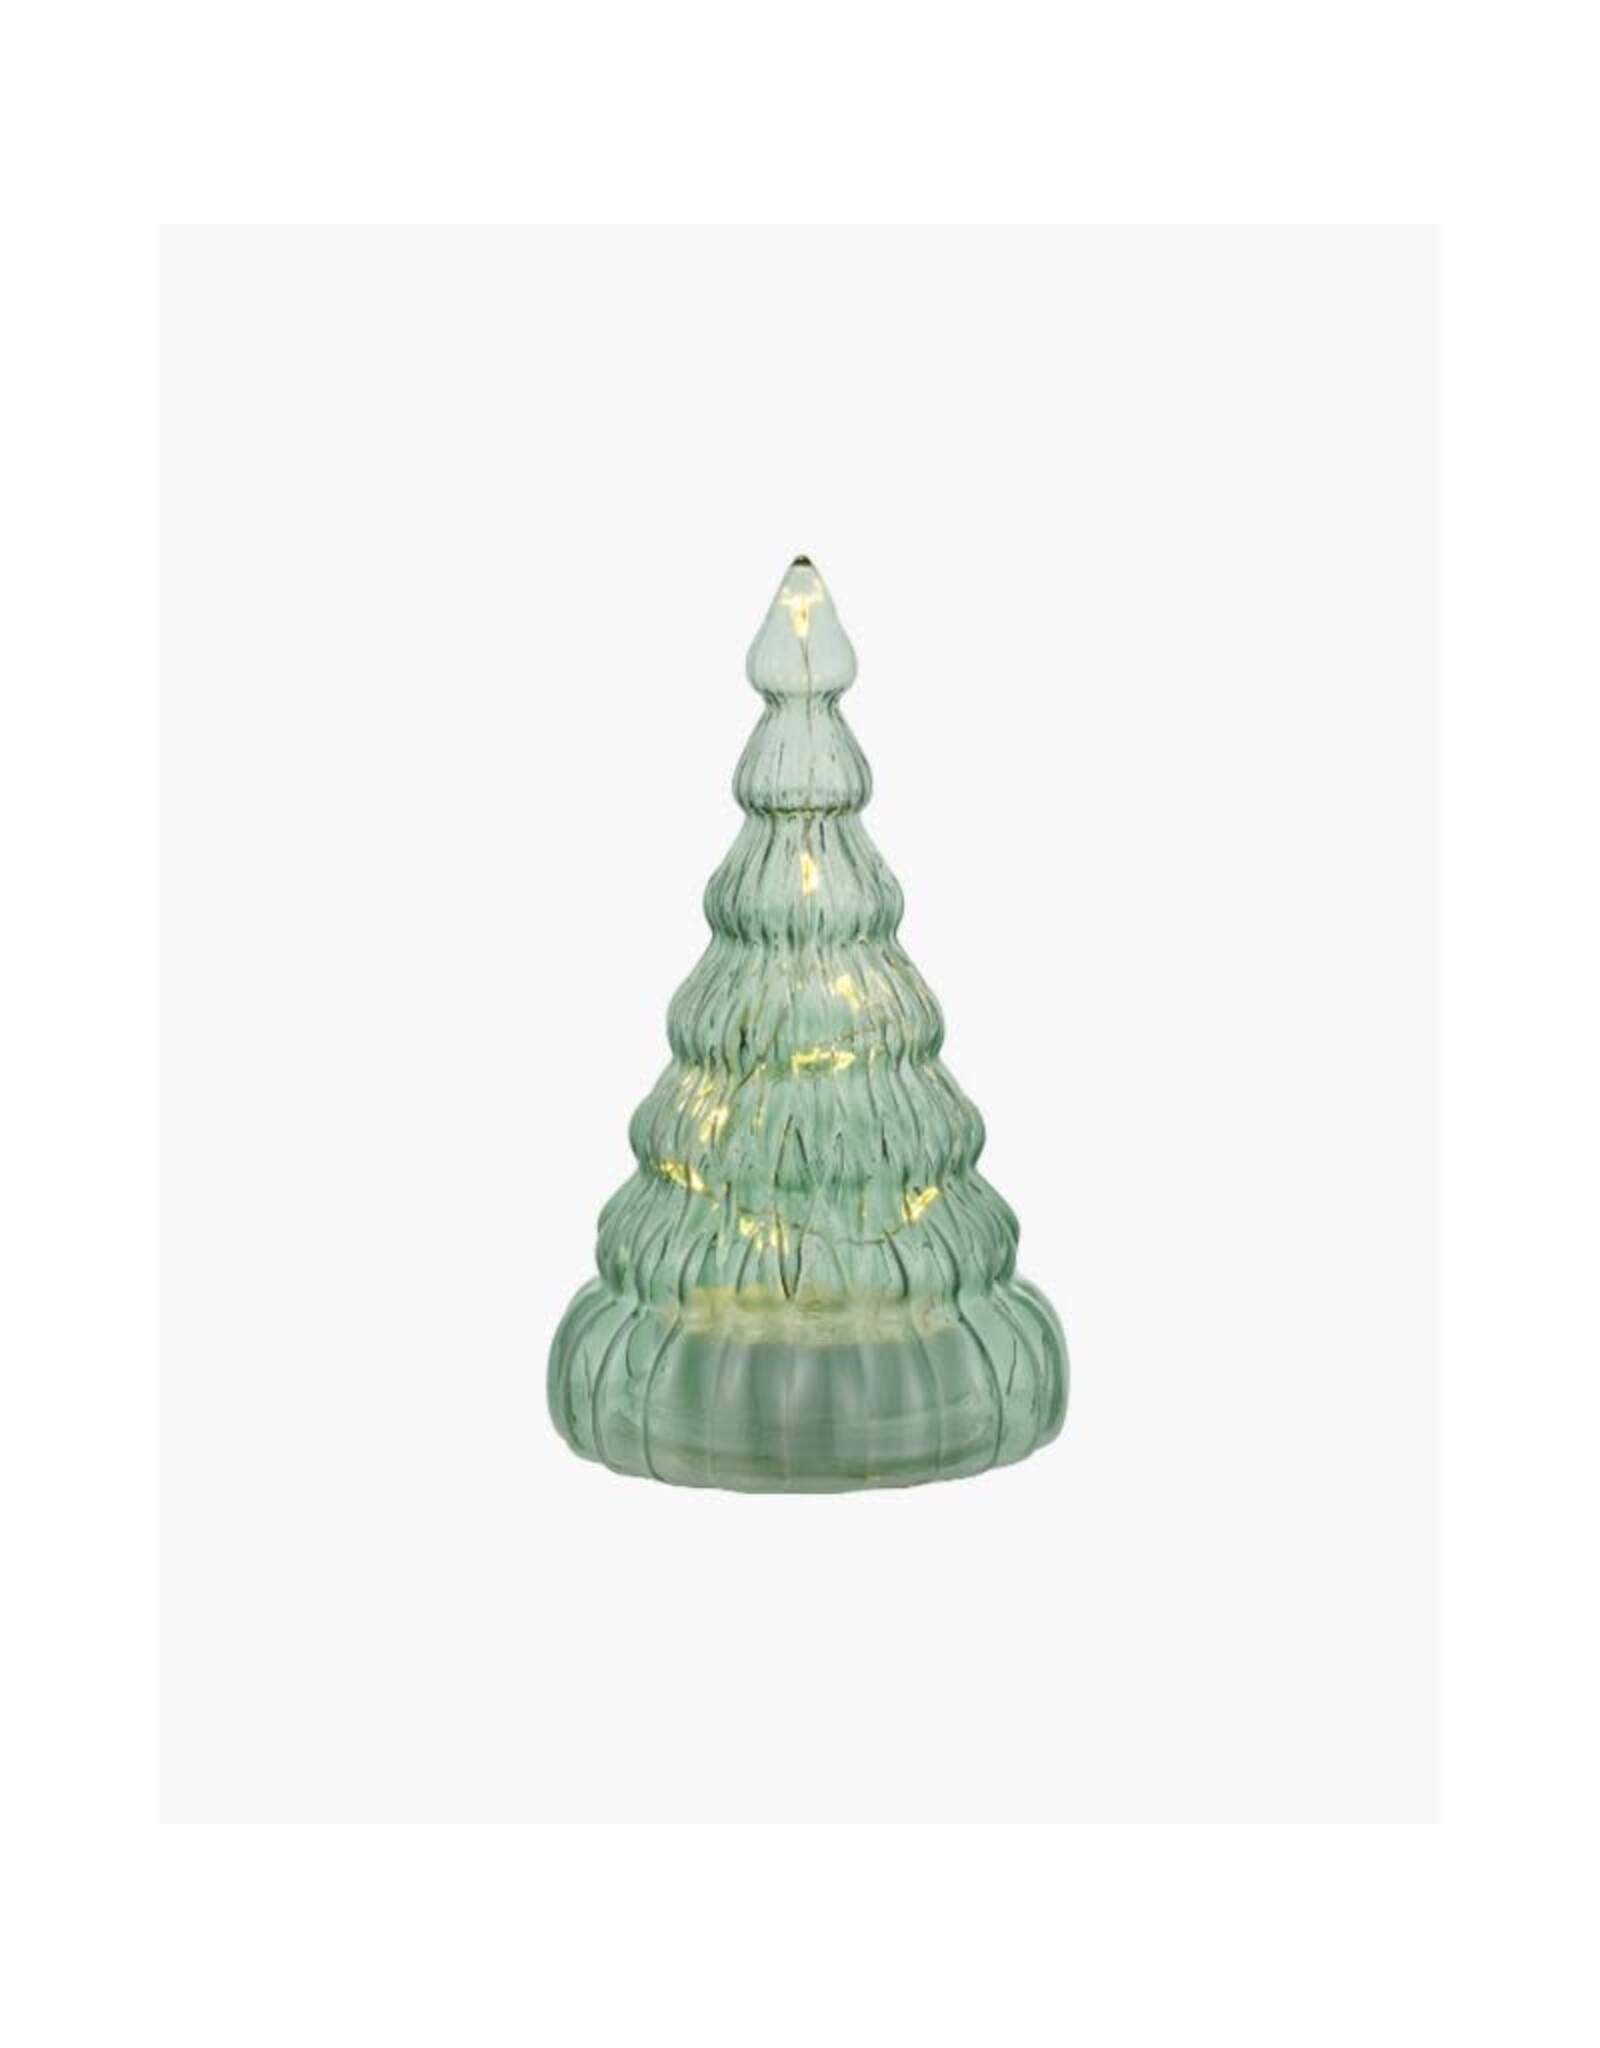 Sirius Lucy Kerstboom - H16,5cm - LED